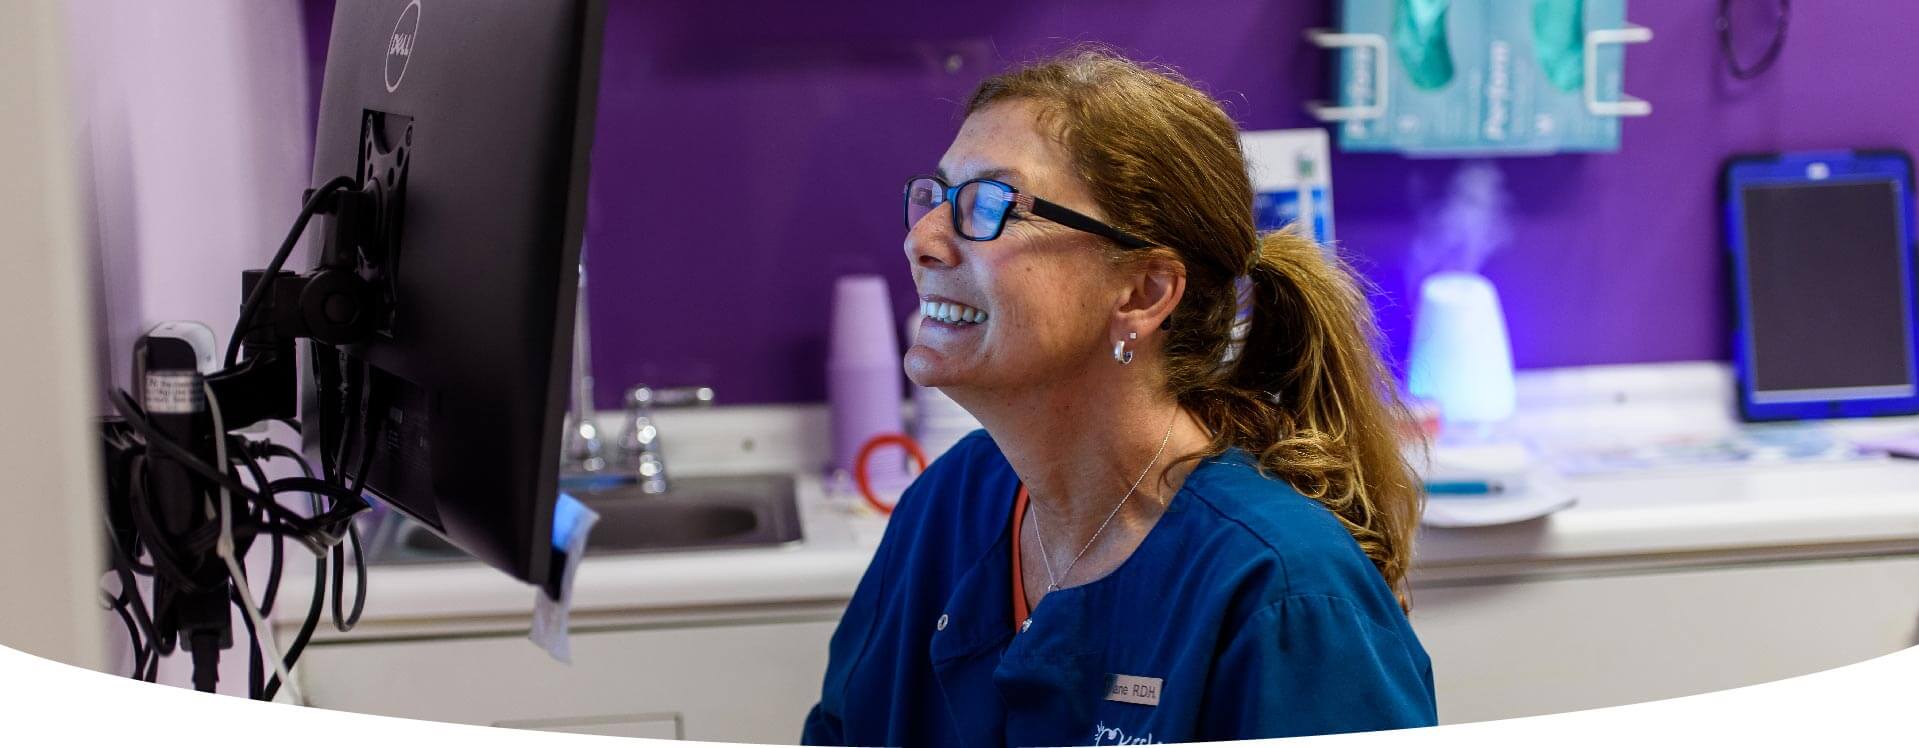 A Lady In a Dental Office Looking At A Computer And Smiling